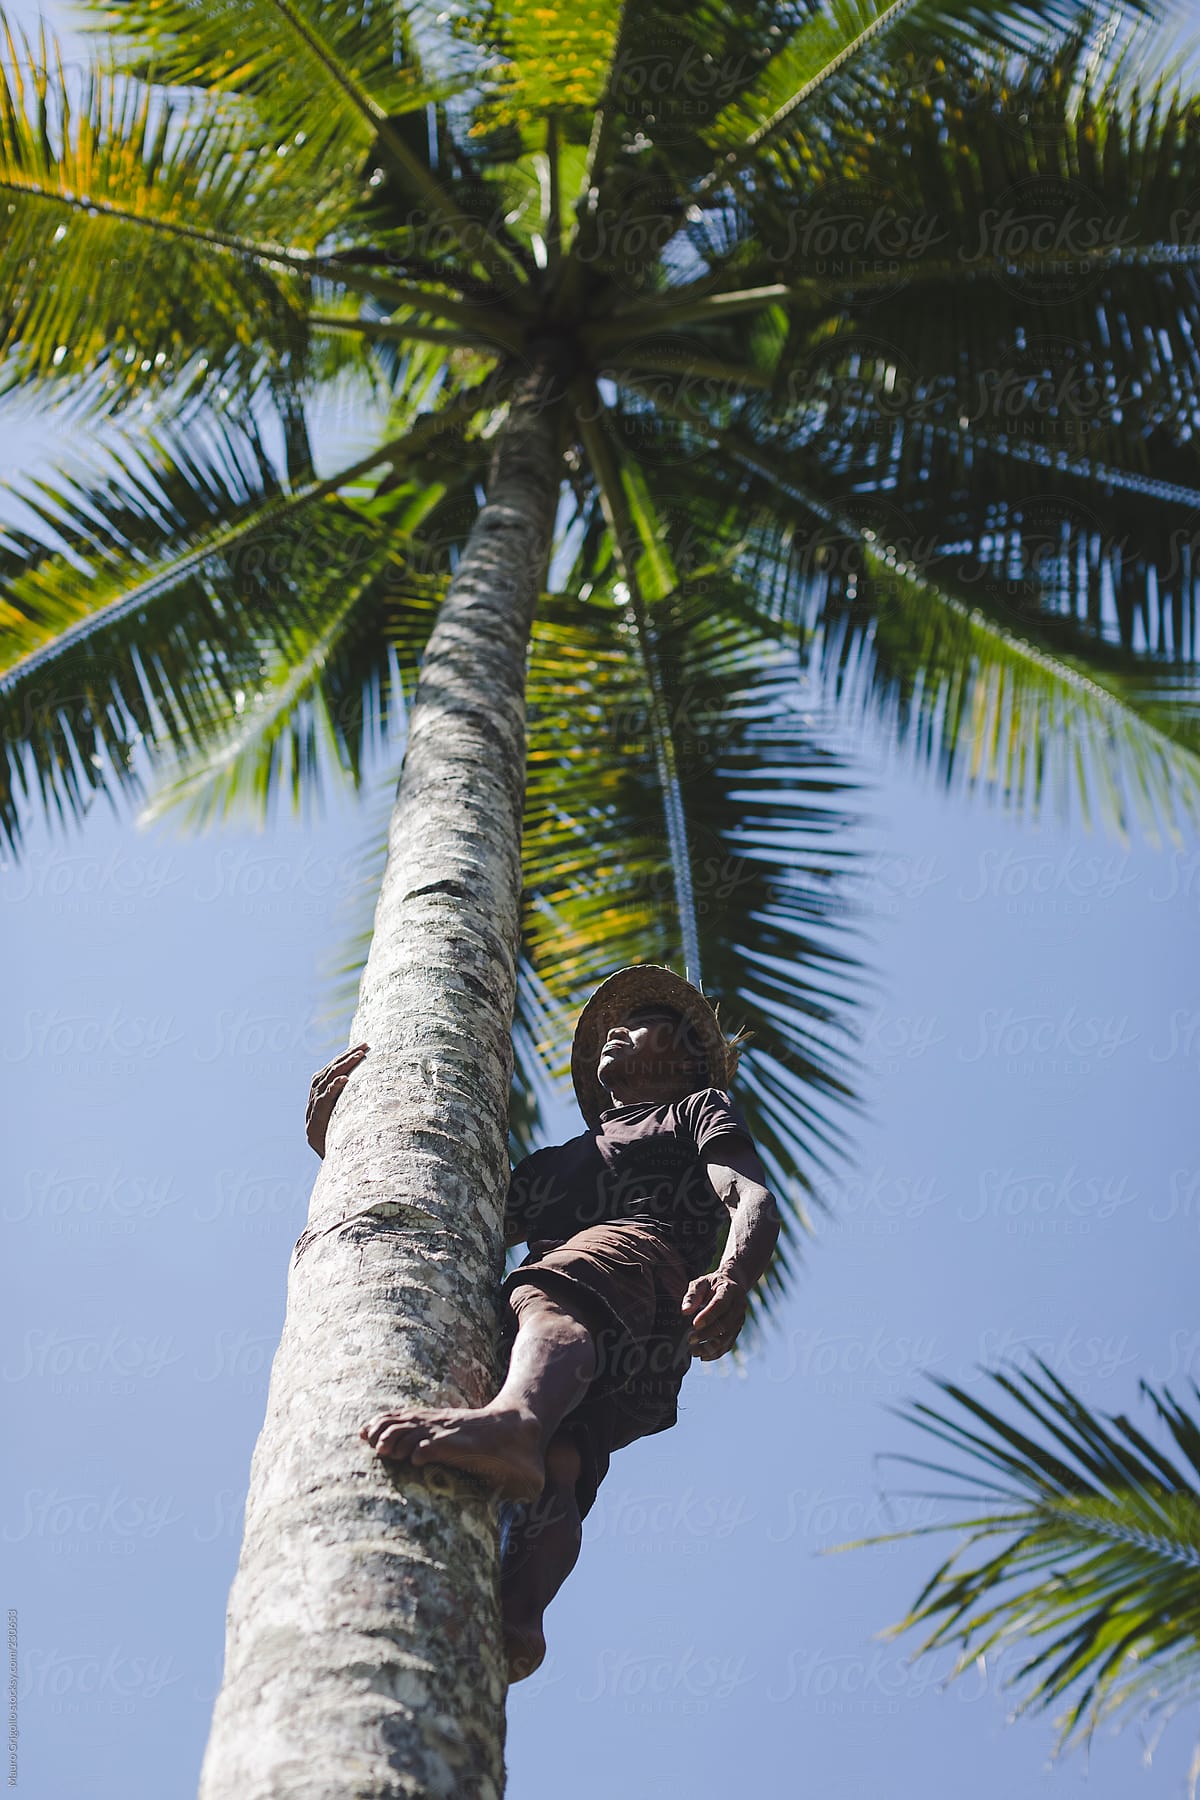 Man climbing a palm tree to get coconut